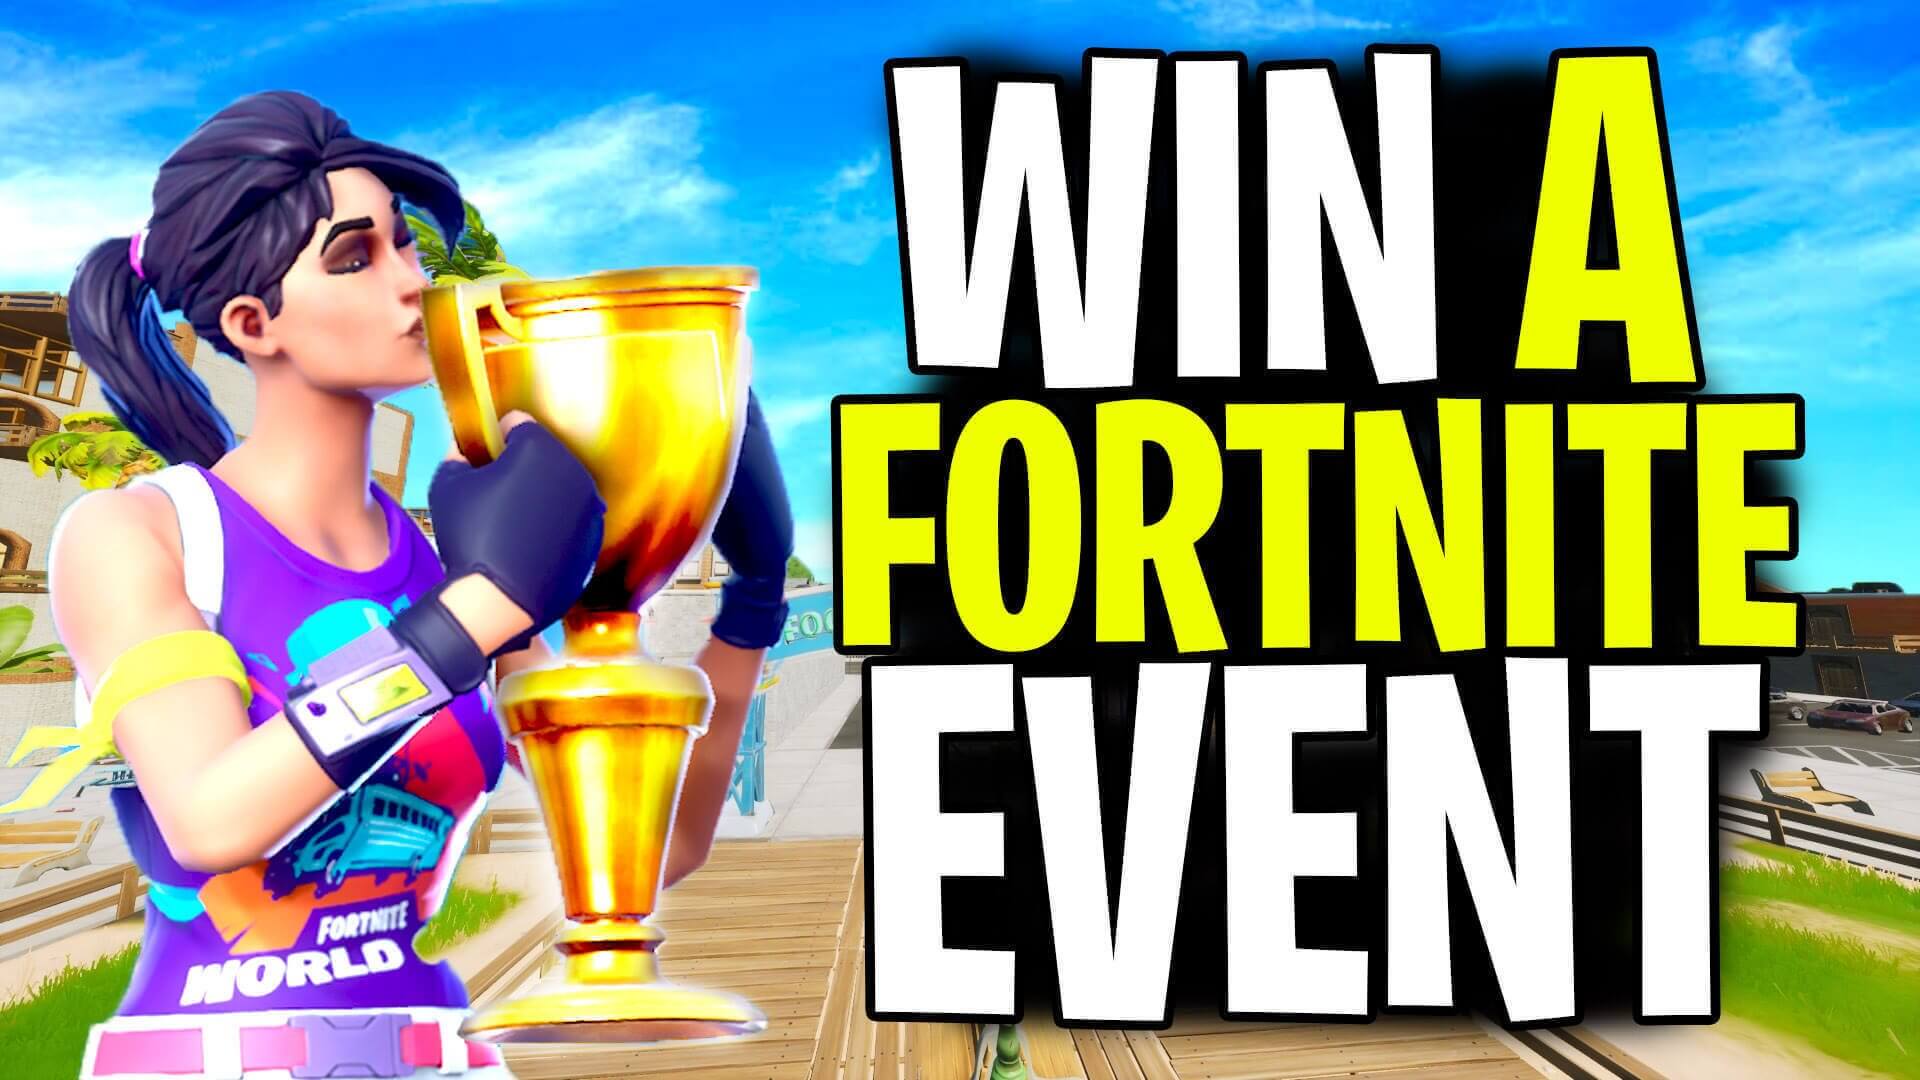 Win your first Fortnite tournament using these helpful tips!